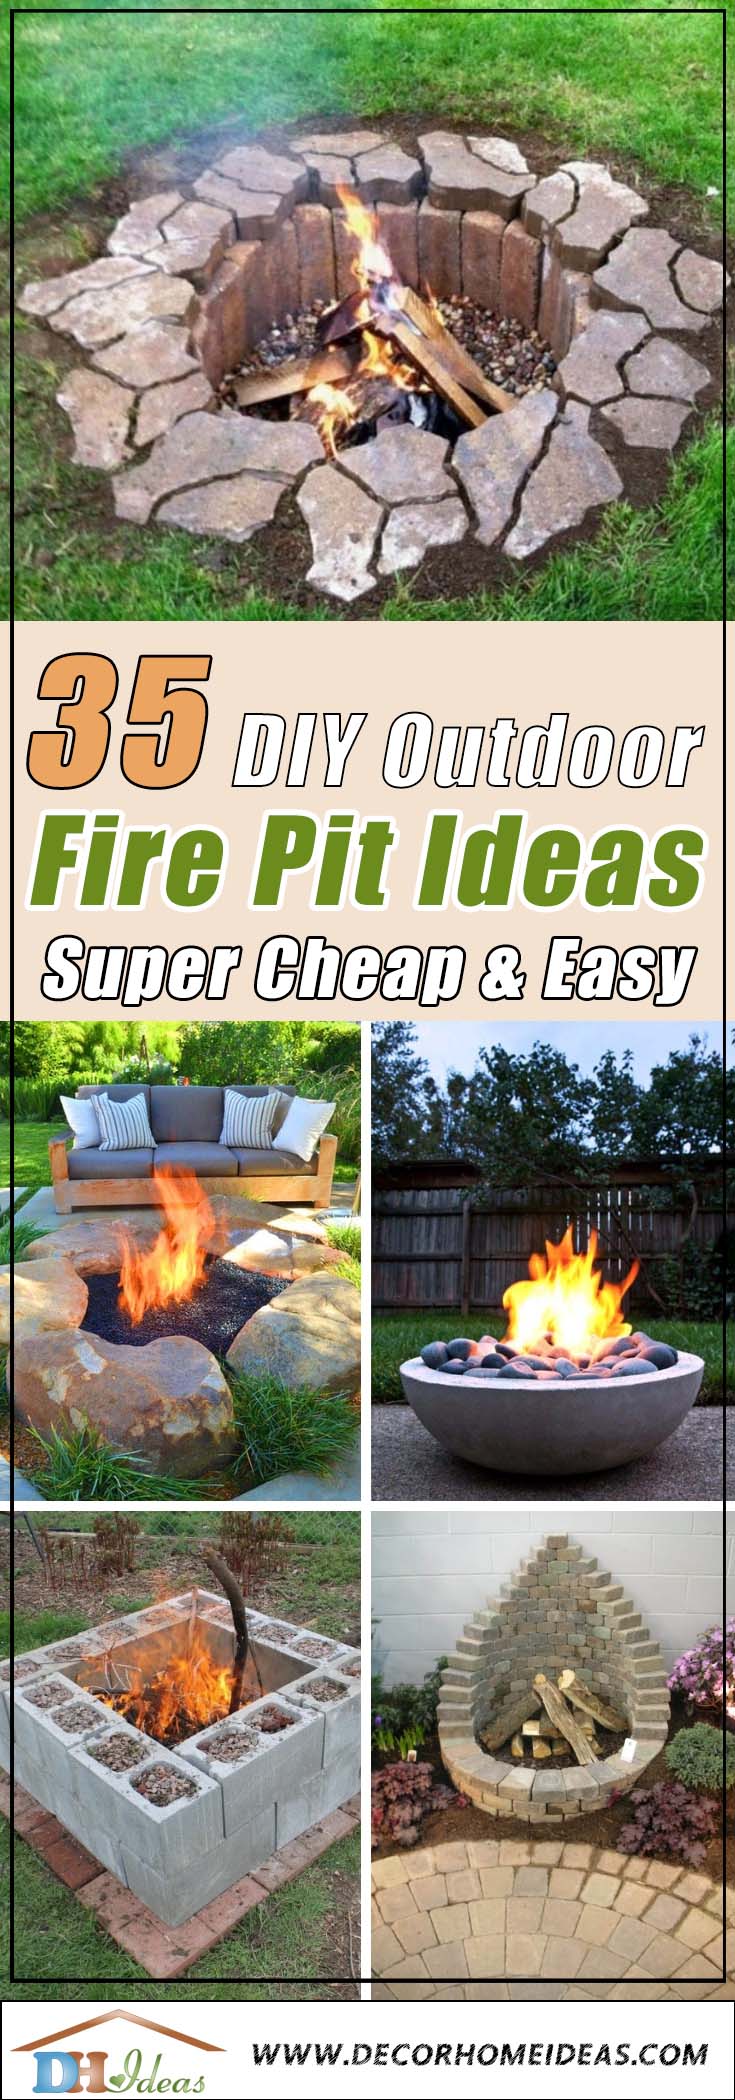 35 Easy To Do Fire Pit Ideas And, Easy Fire Pit